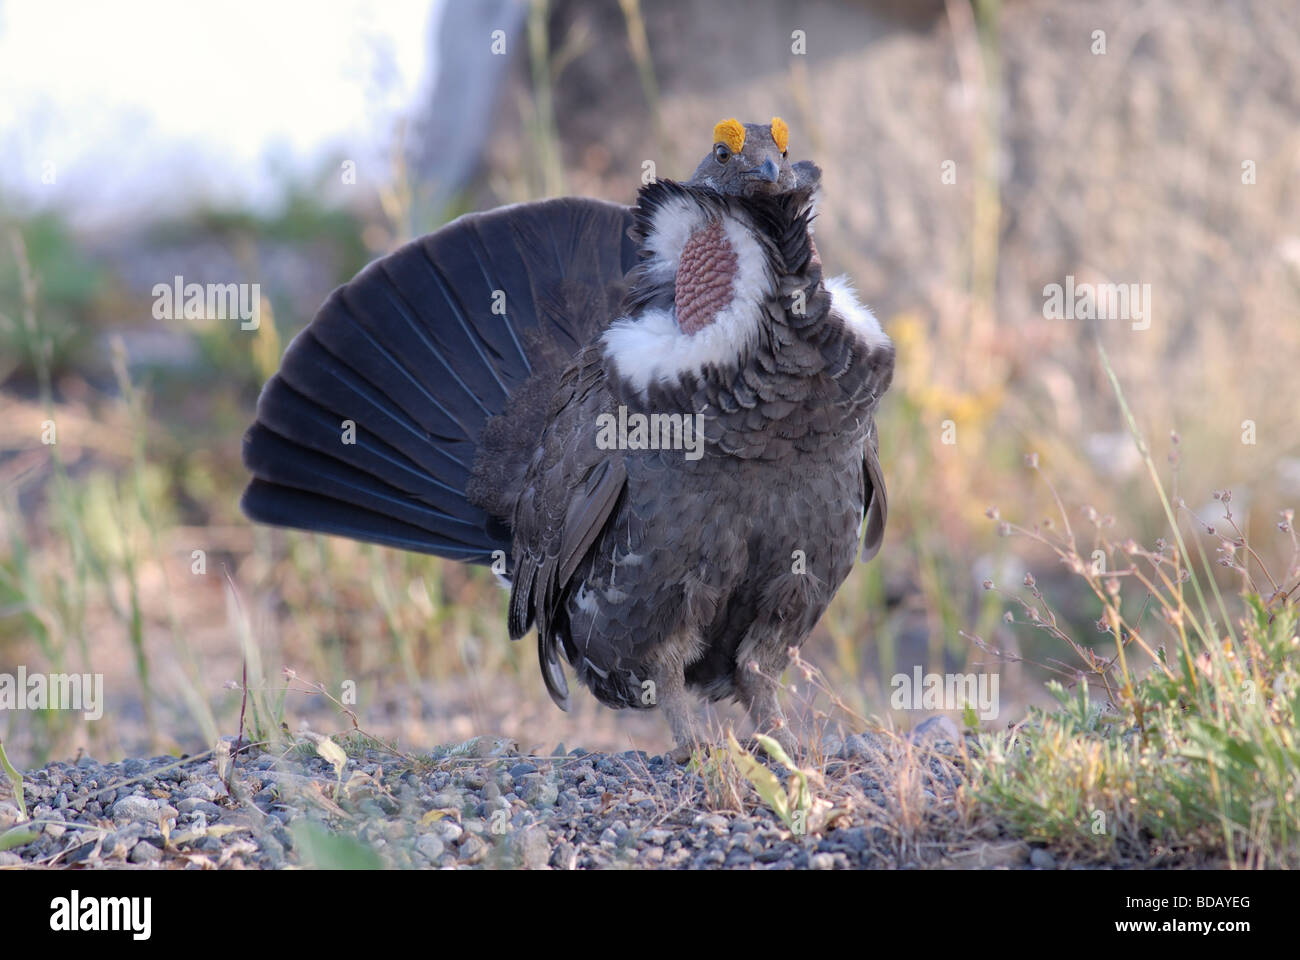 Stock photo of a male blue grouse in breeding display, Yellowstone National Park, Wyoming. Stock Photo